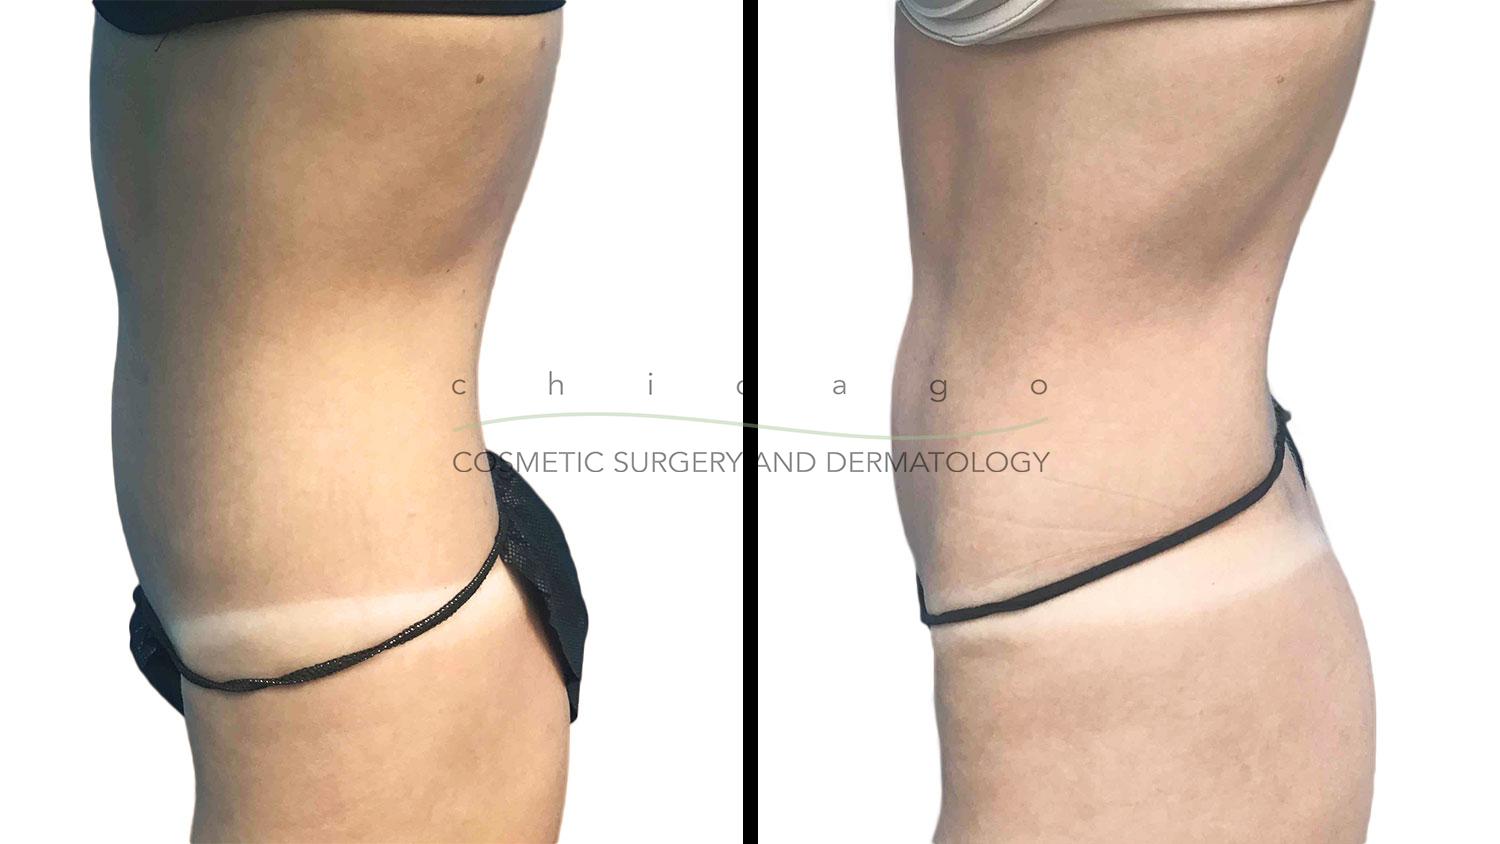 Emsculpt abdomen sculpting before and after Chicago